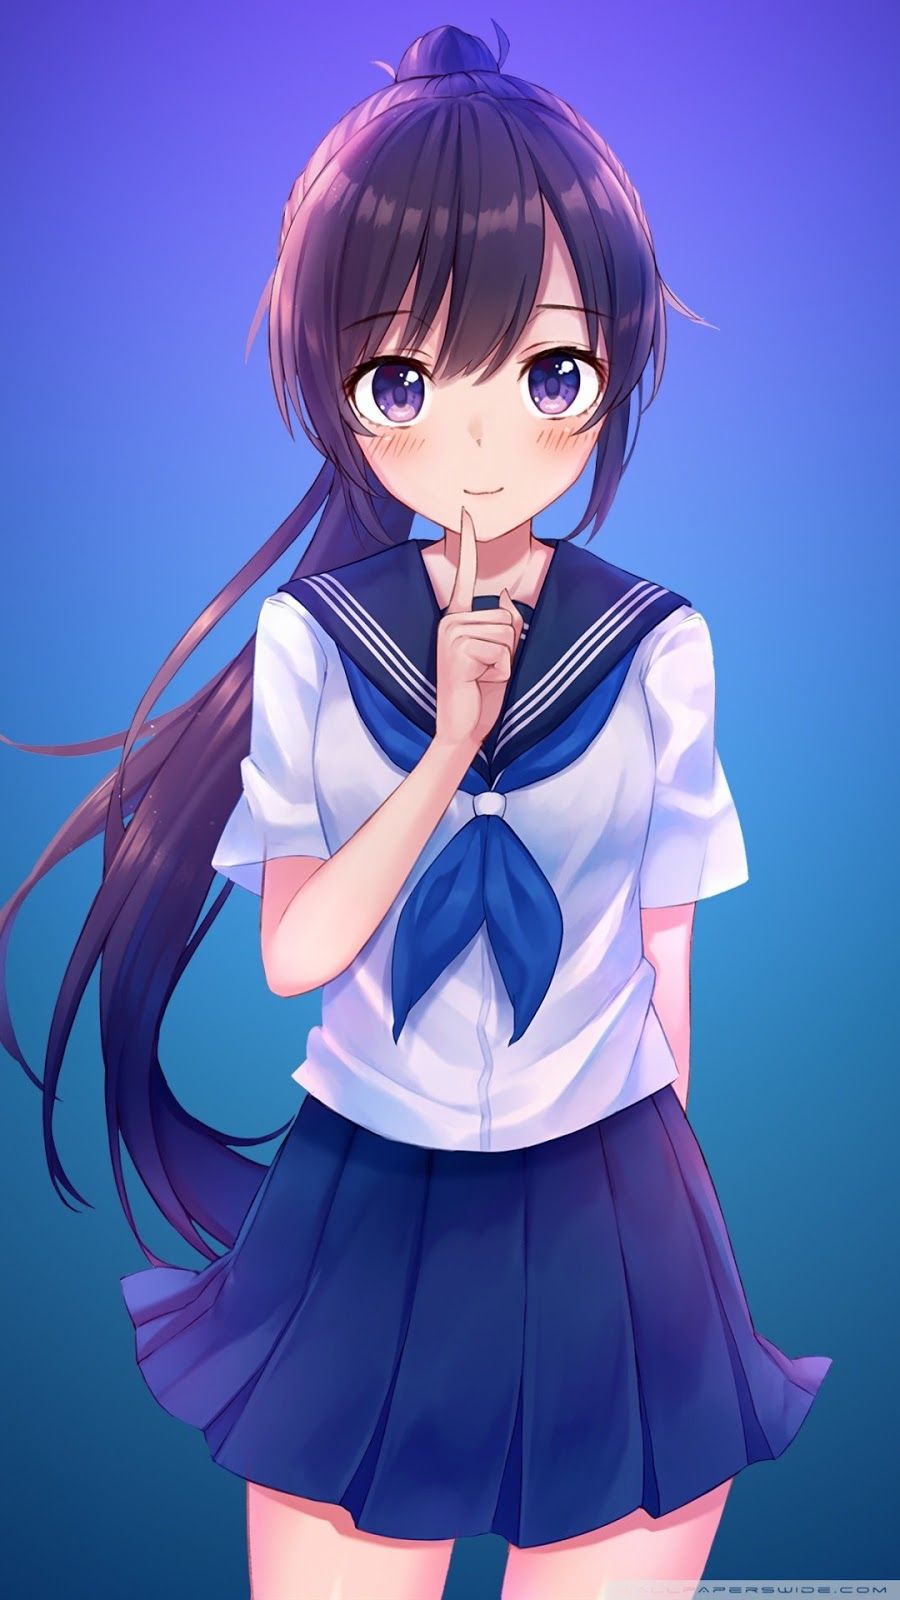 Free Wallpaper For Android. Wallpaper For iPhone. MobileWallz: Cute Anime Girl Wallpaper